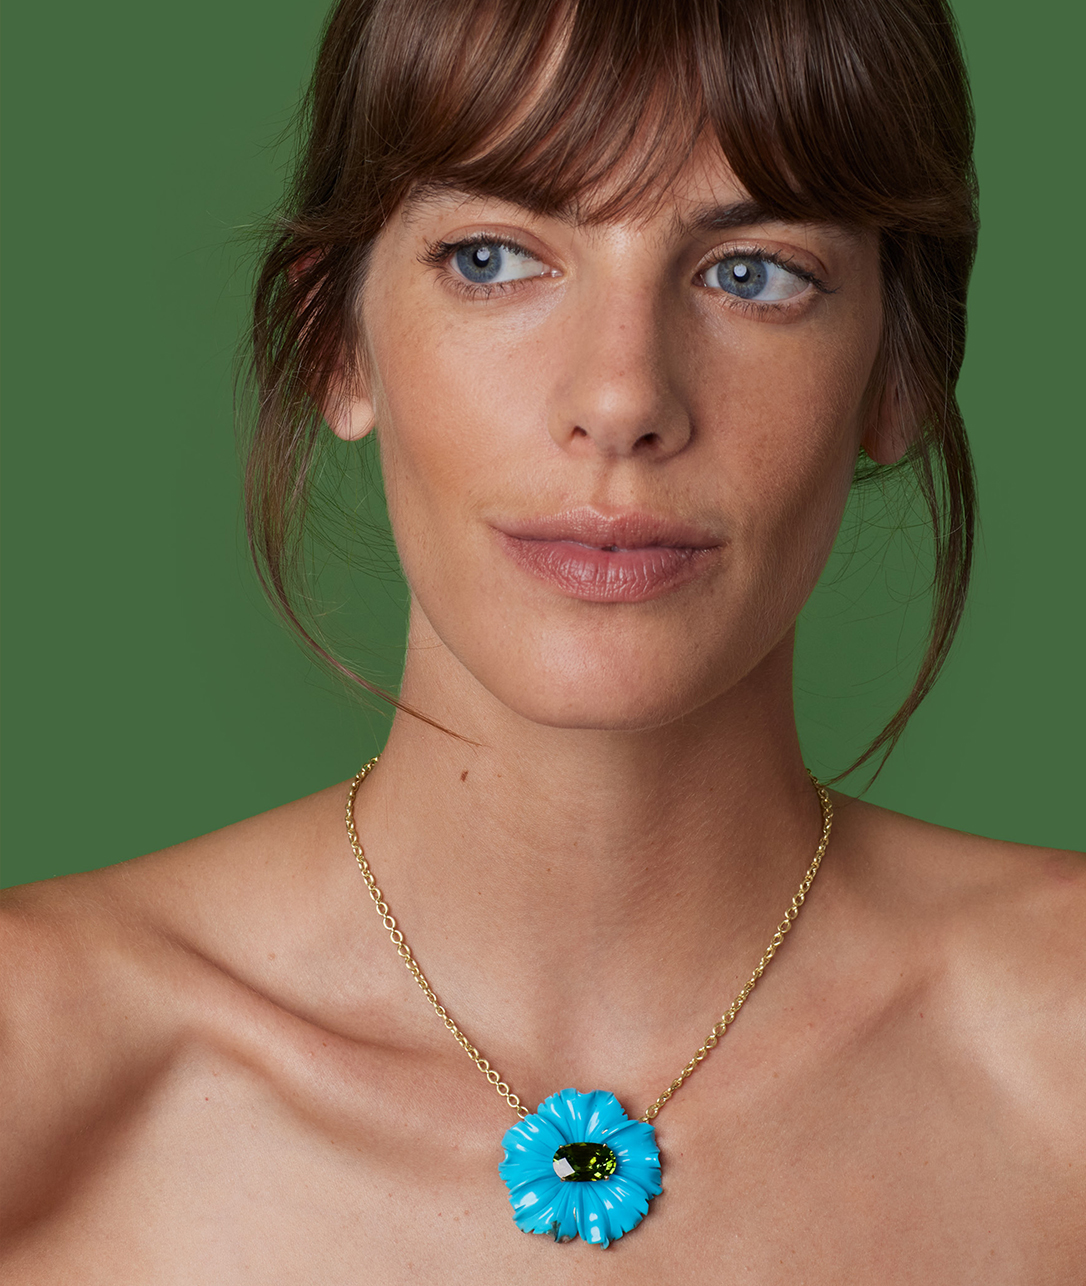 Each one of our flowers, like this turquoise pendant, is carved by hand, making it truly one-of-a-kind.SHOP TURQUOISE